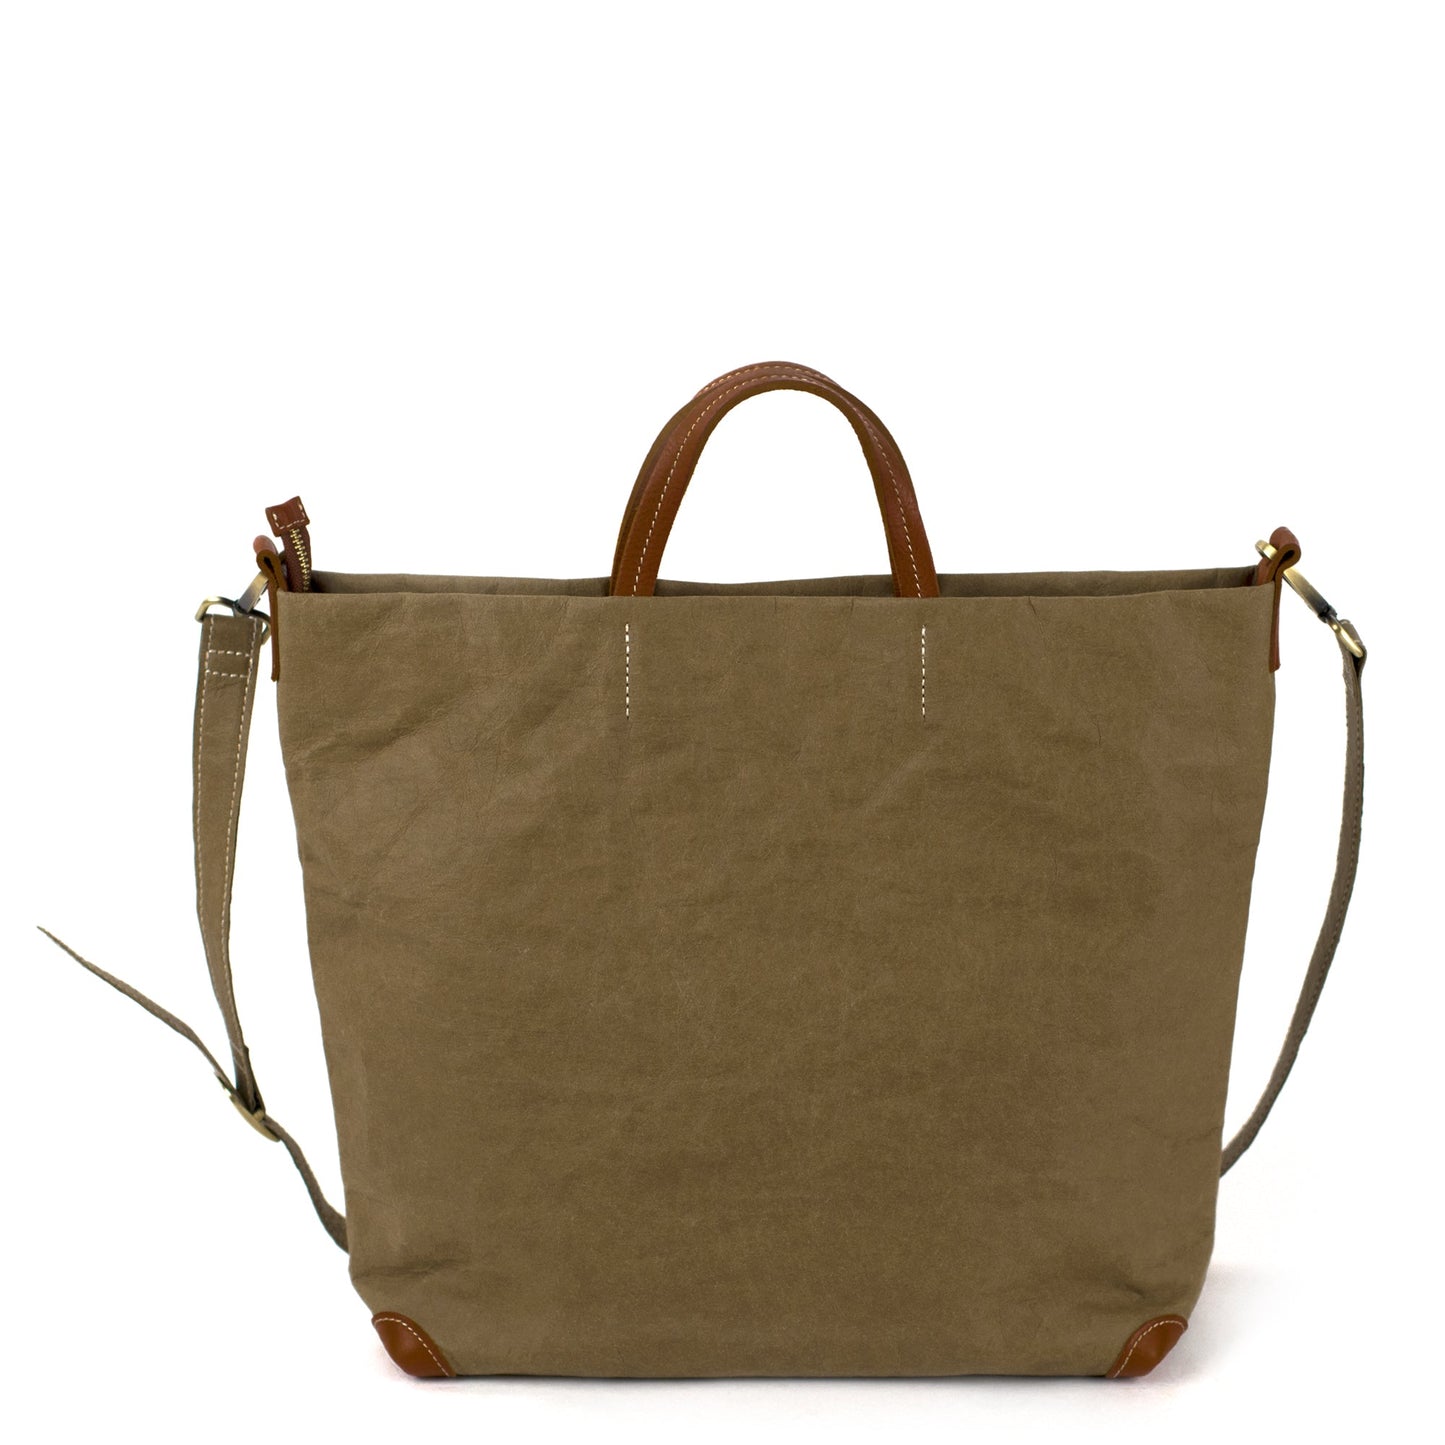 A square olive washable paper tote bag is shown with one long olive shoulder strap and two small tan handles. The corners of the bag are protected by brown corners.